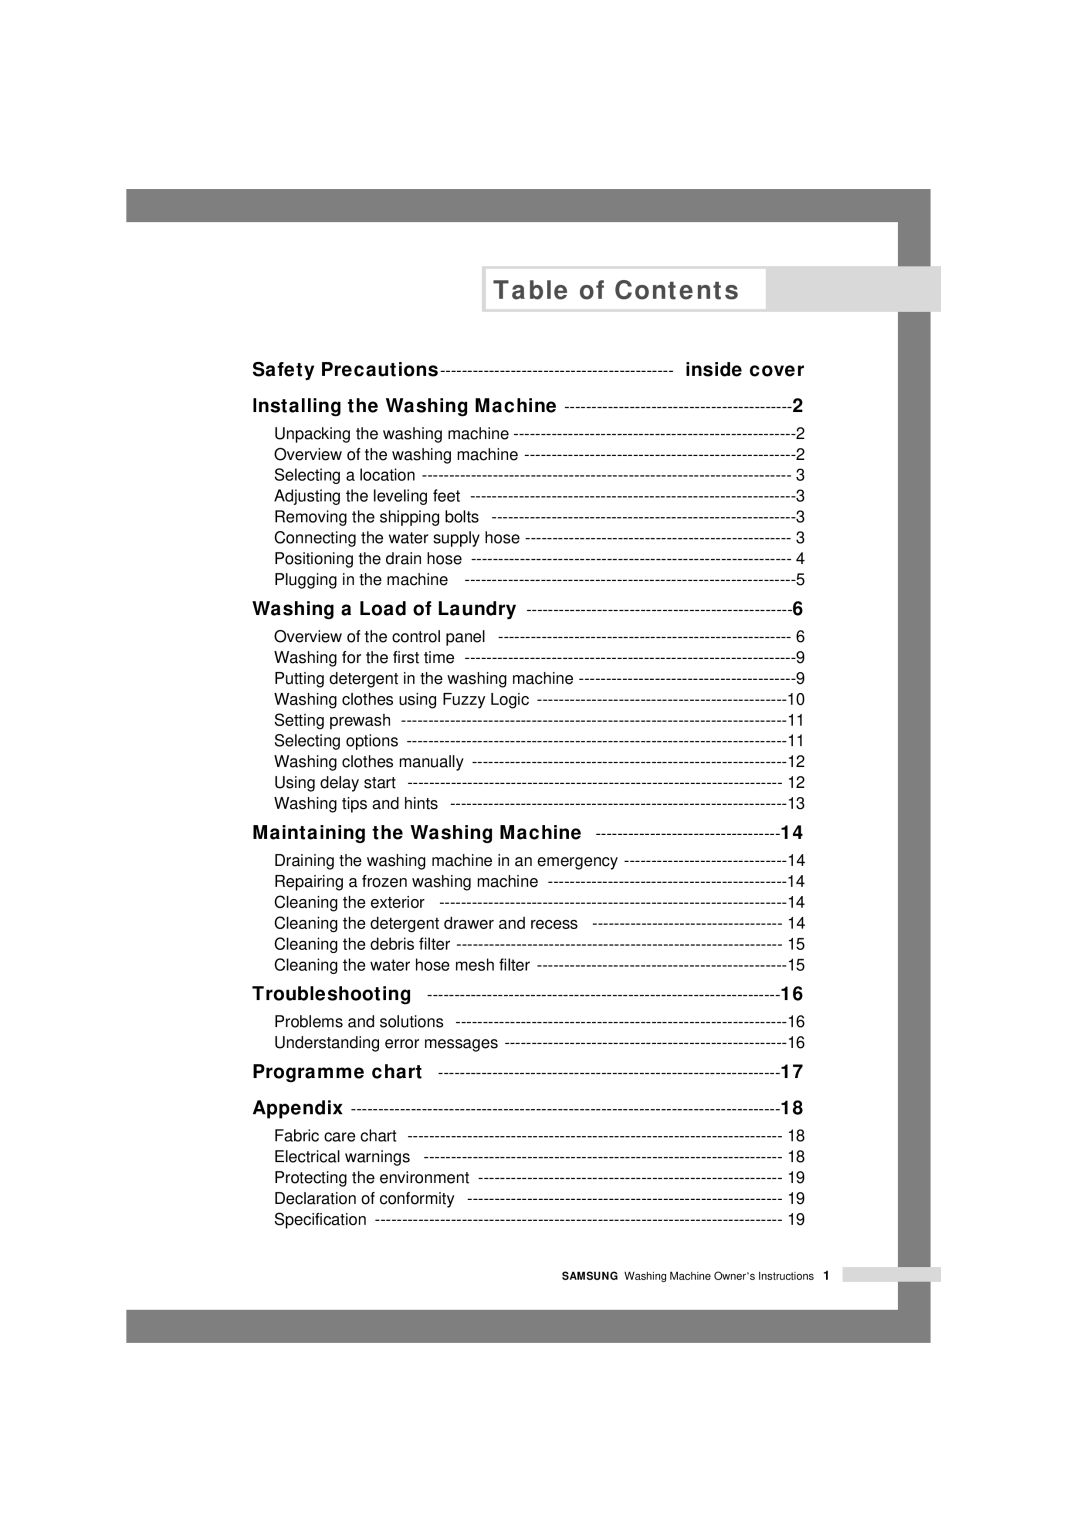 Samsung P1003J, P805J, P1405J, P1005j, P1205J, P803J, P1403J, P1203J manual Table of Contents, inside cover, Safety Precautions 